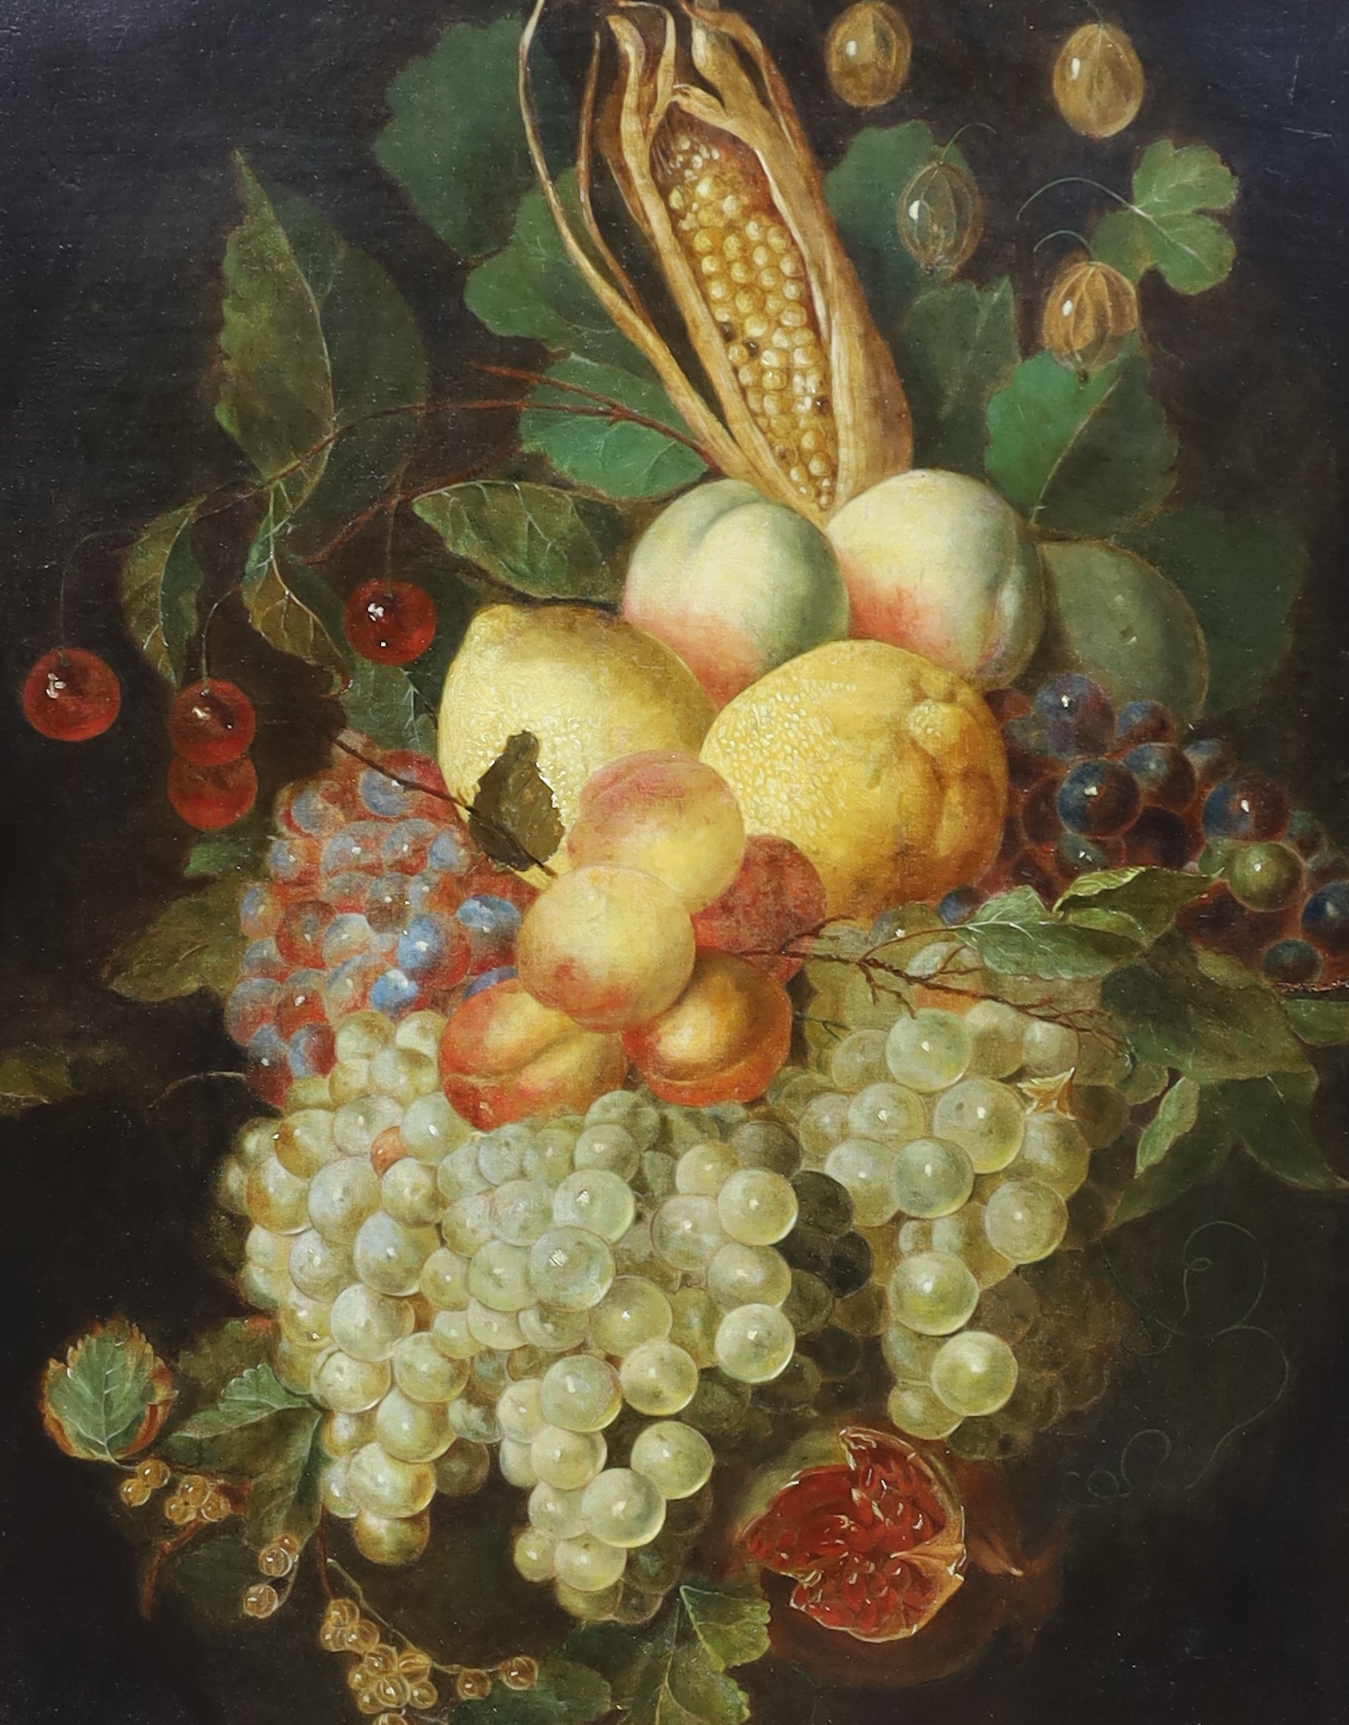 Attributed to Jan Pauwel Gillemans (Dutch, 1618-c.1680), Still life of sweetcorn, gooseberries, peaches, lemons, cherries, grapes and a pomegranate, oil on canvas, 52 x 42cm